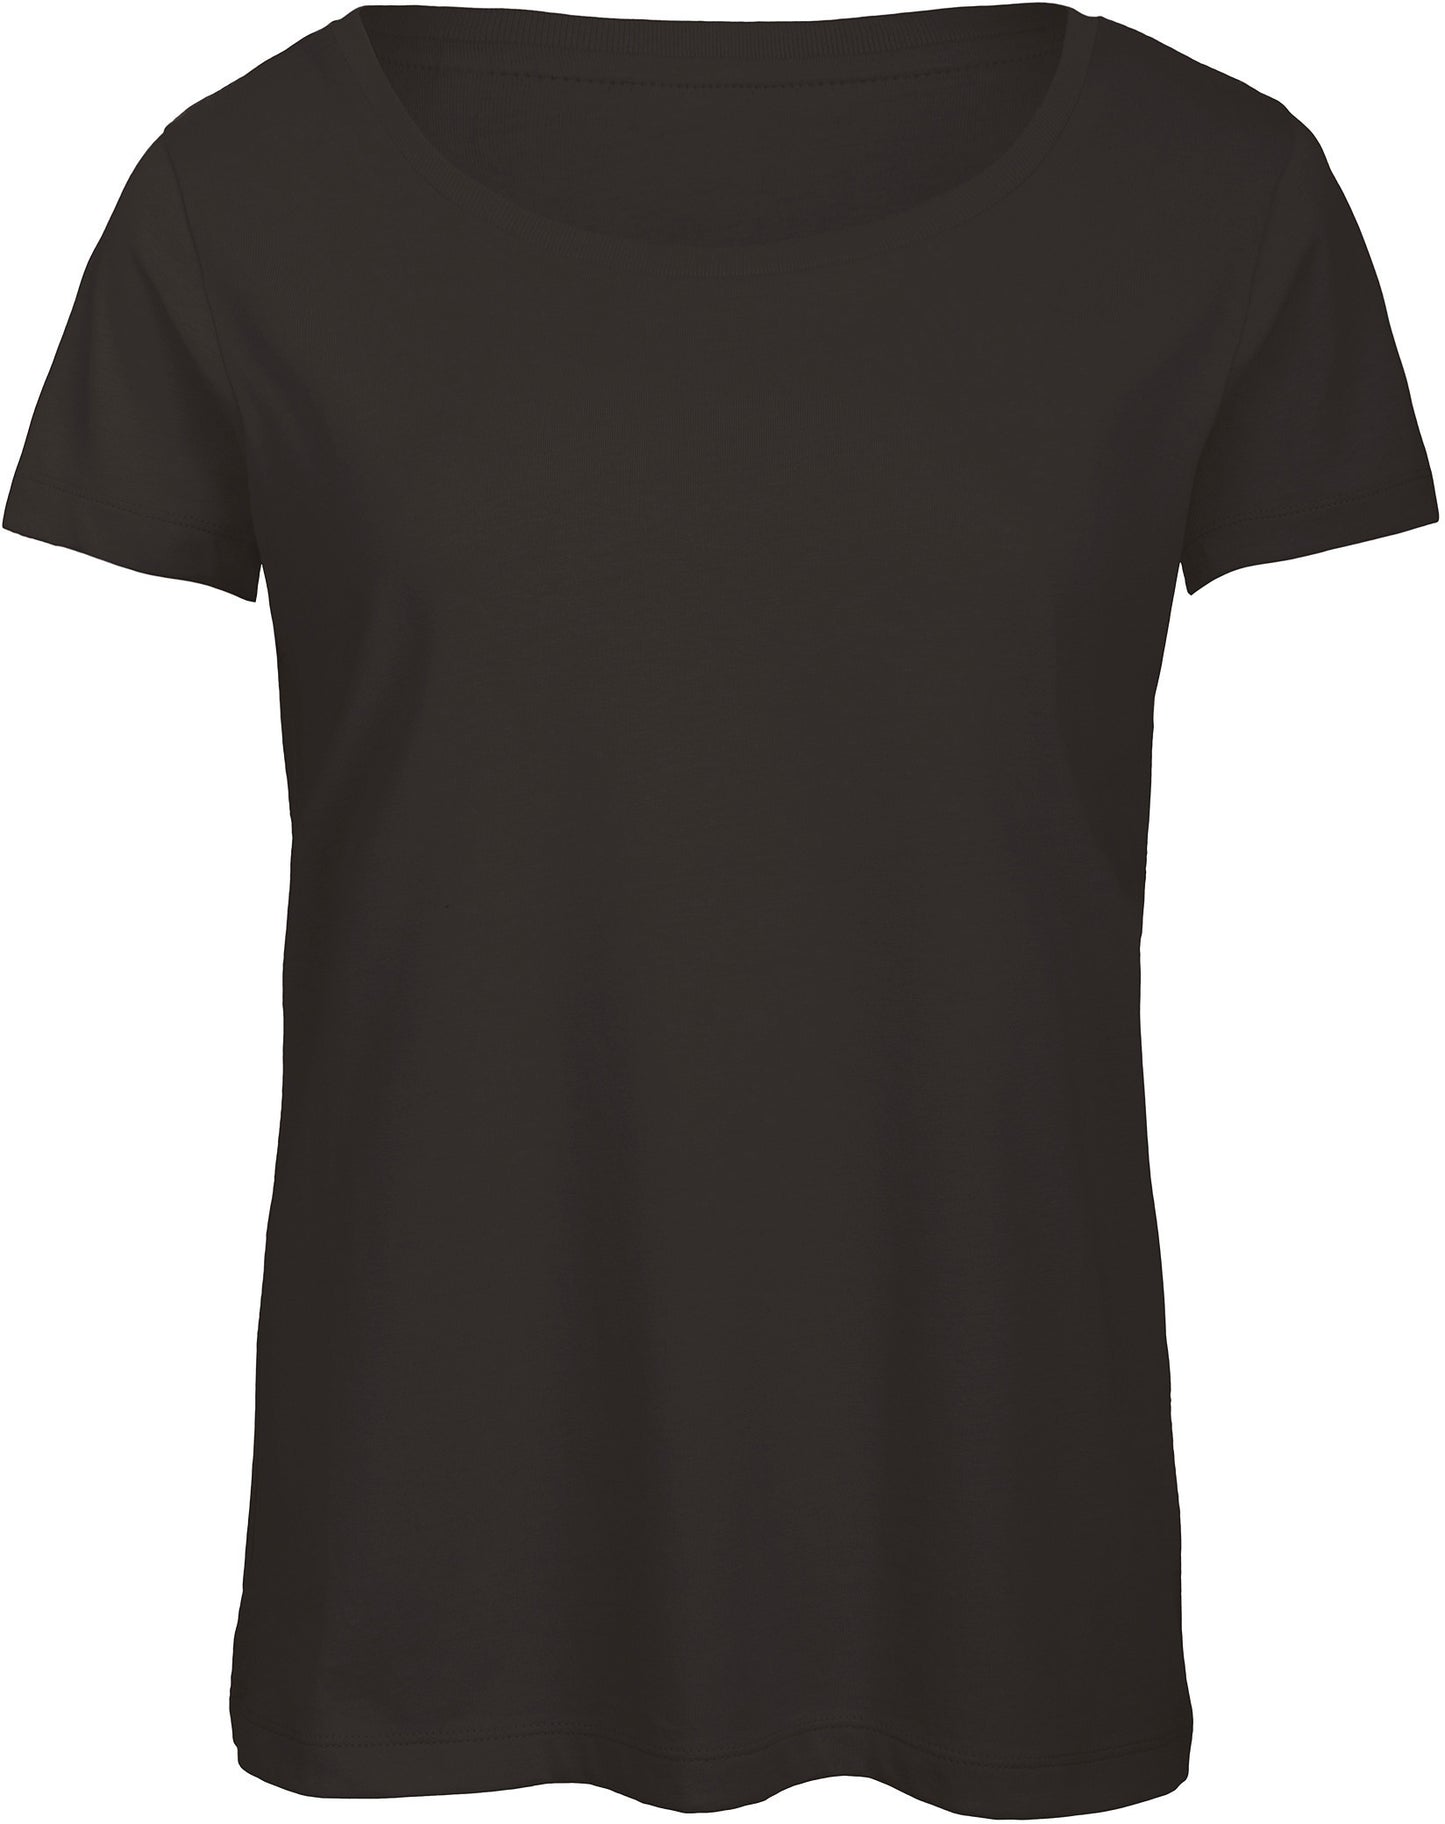 CGTW056 - T-shirt Triblend col rond Femme